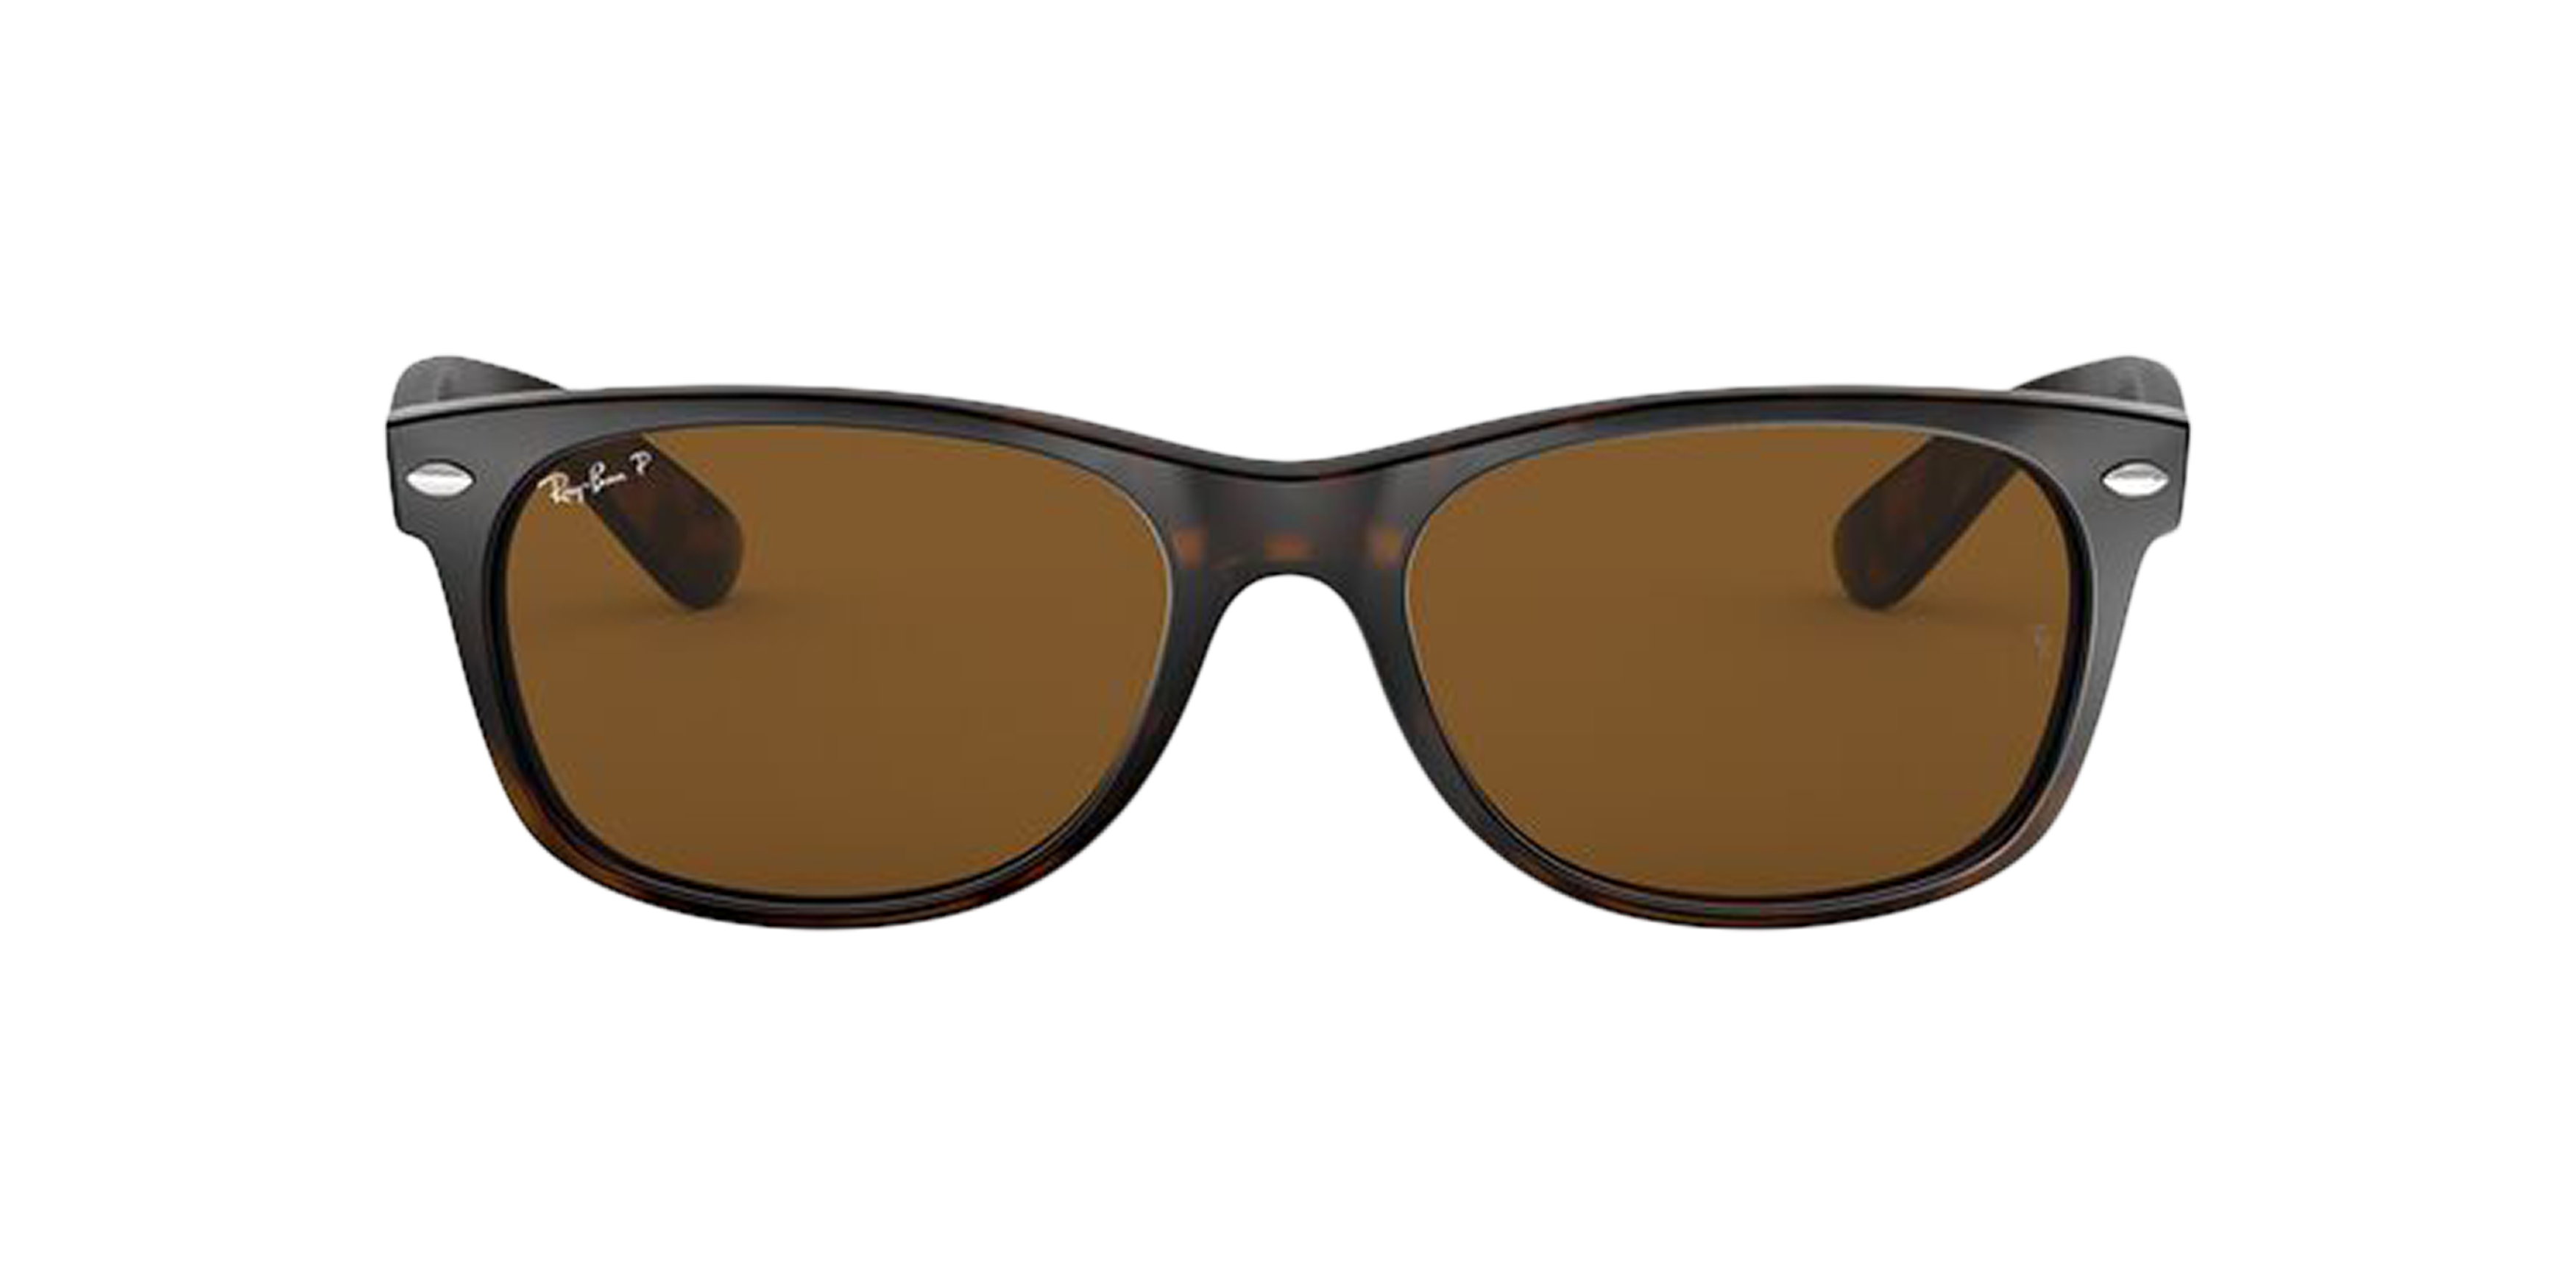 [products.image.front] RAY-BAN RB2132 902/57